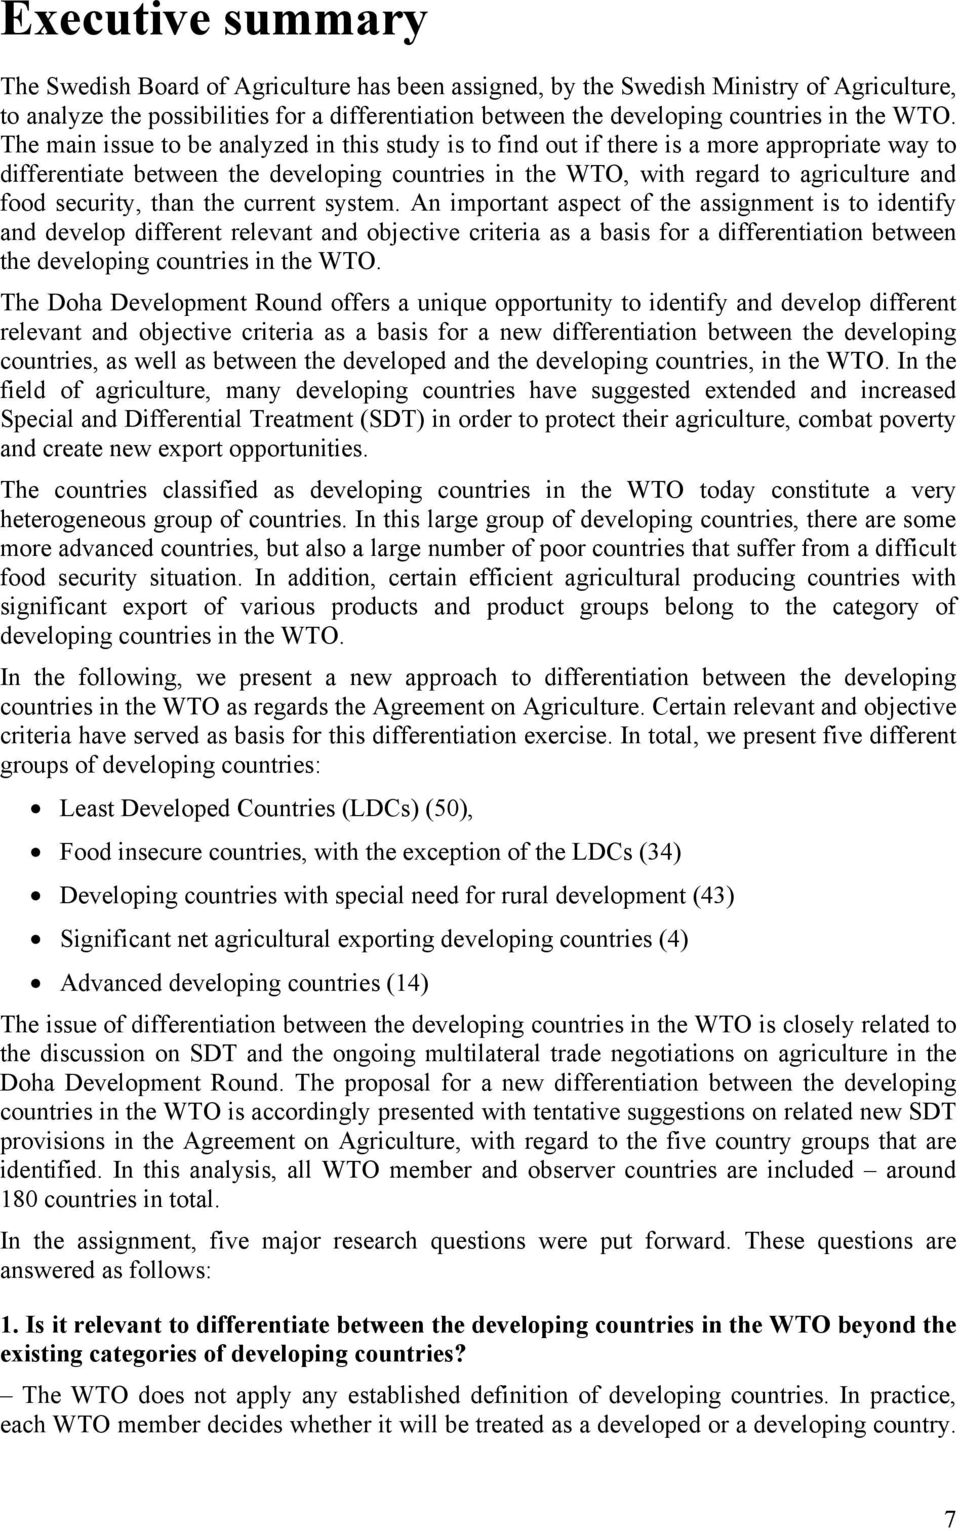 The main issue to be analyzed in this study is to find out if there is a more appropriate way to differentiate between the developing countries in the WTO, with regard to agriculture and food